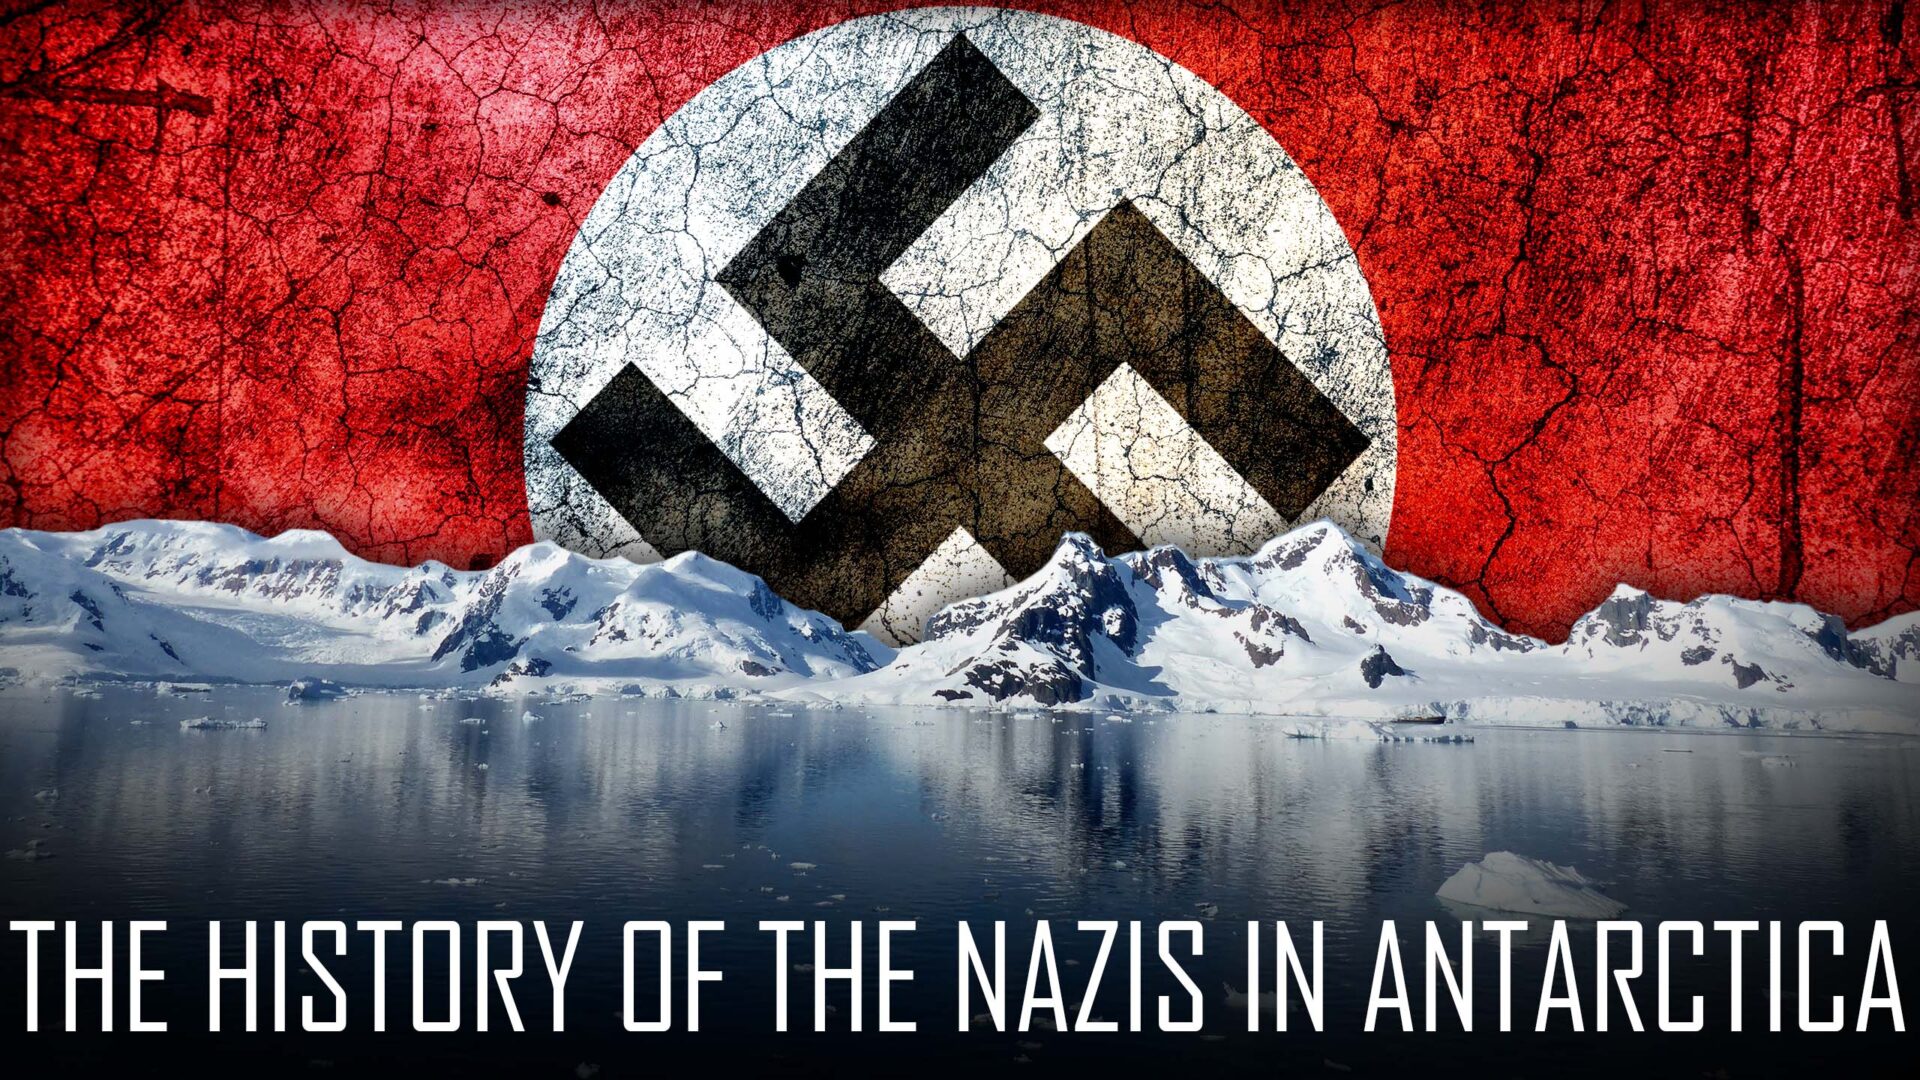 The History of the Nazis in Antarctica